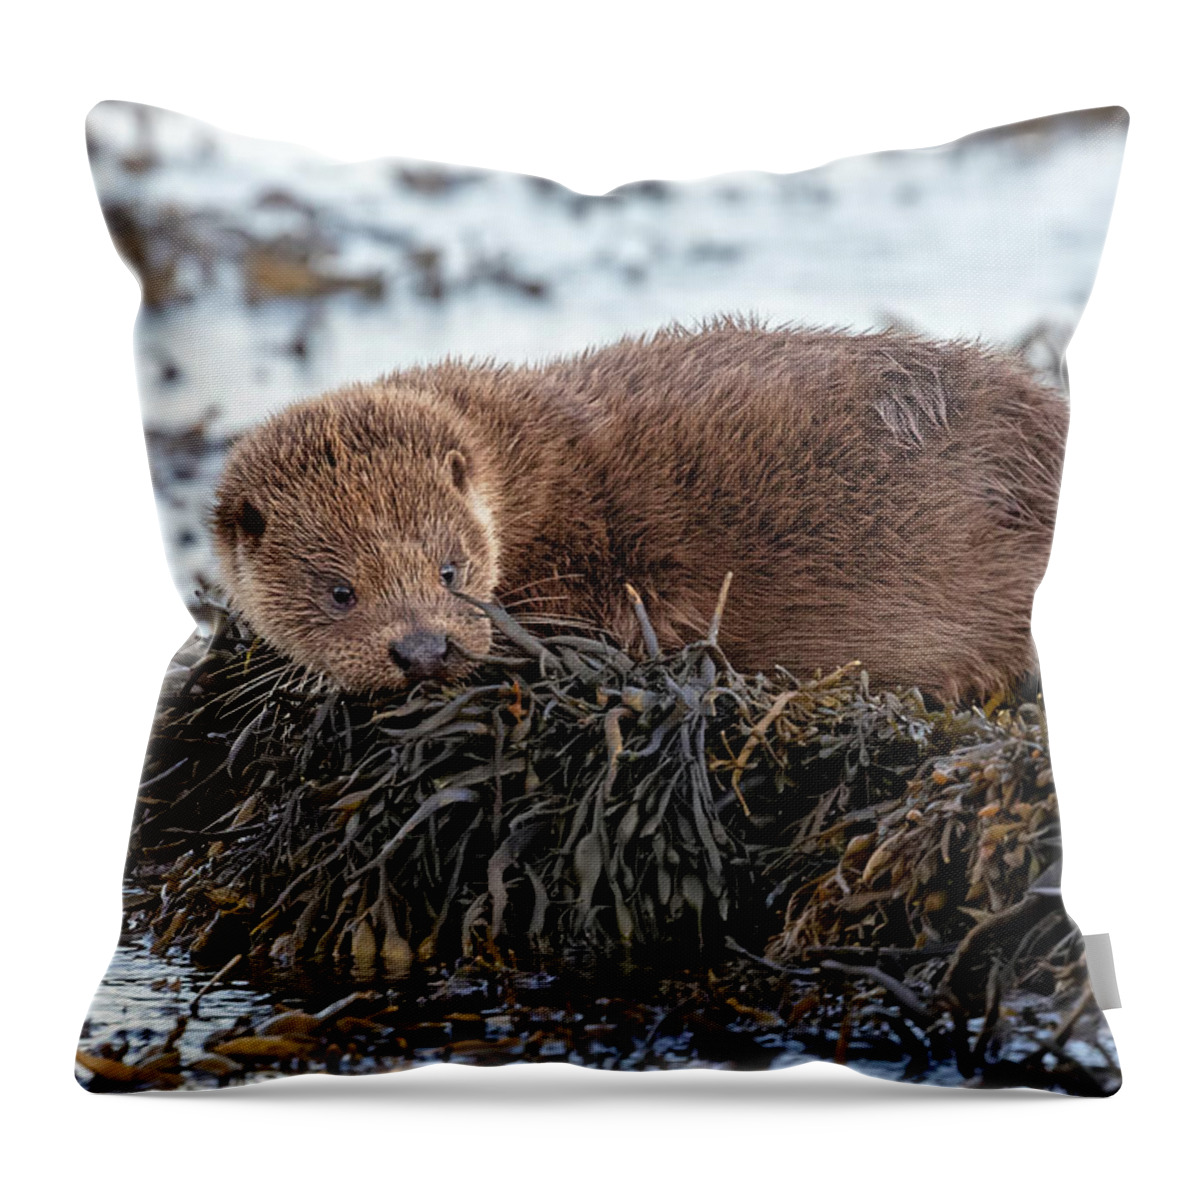 Otter Throw Pillow featuring the photograph Otter Cub On Seaweed by Pete Walkden